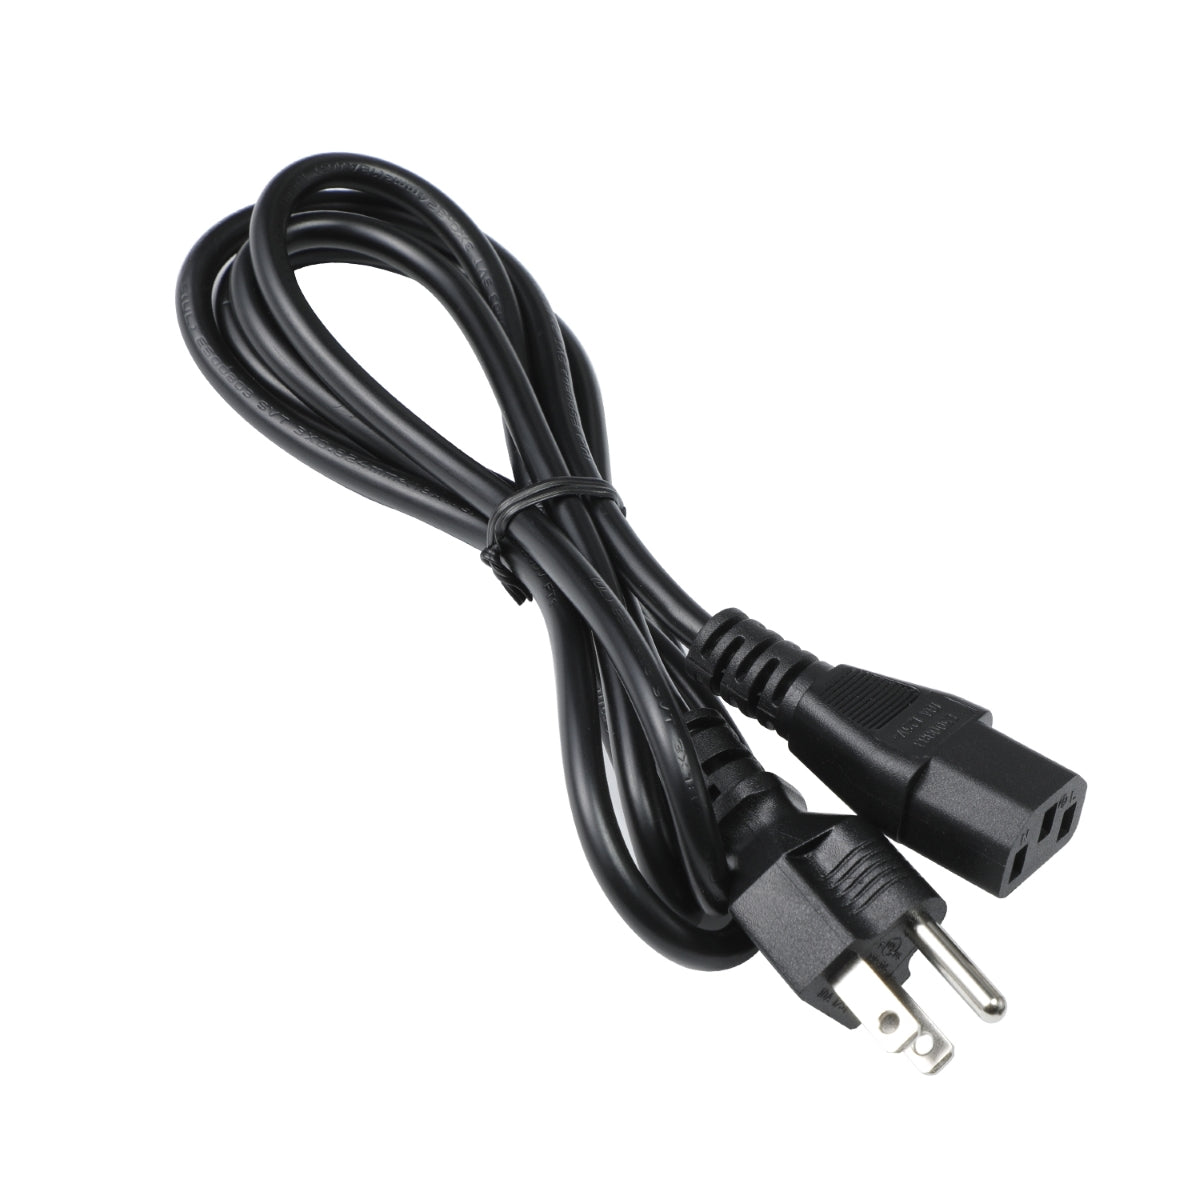 Power Cord for ViewSonic VA2246mh-LED Monitor